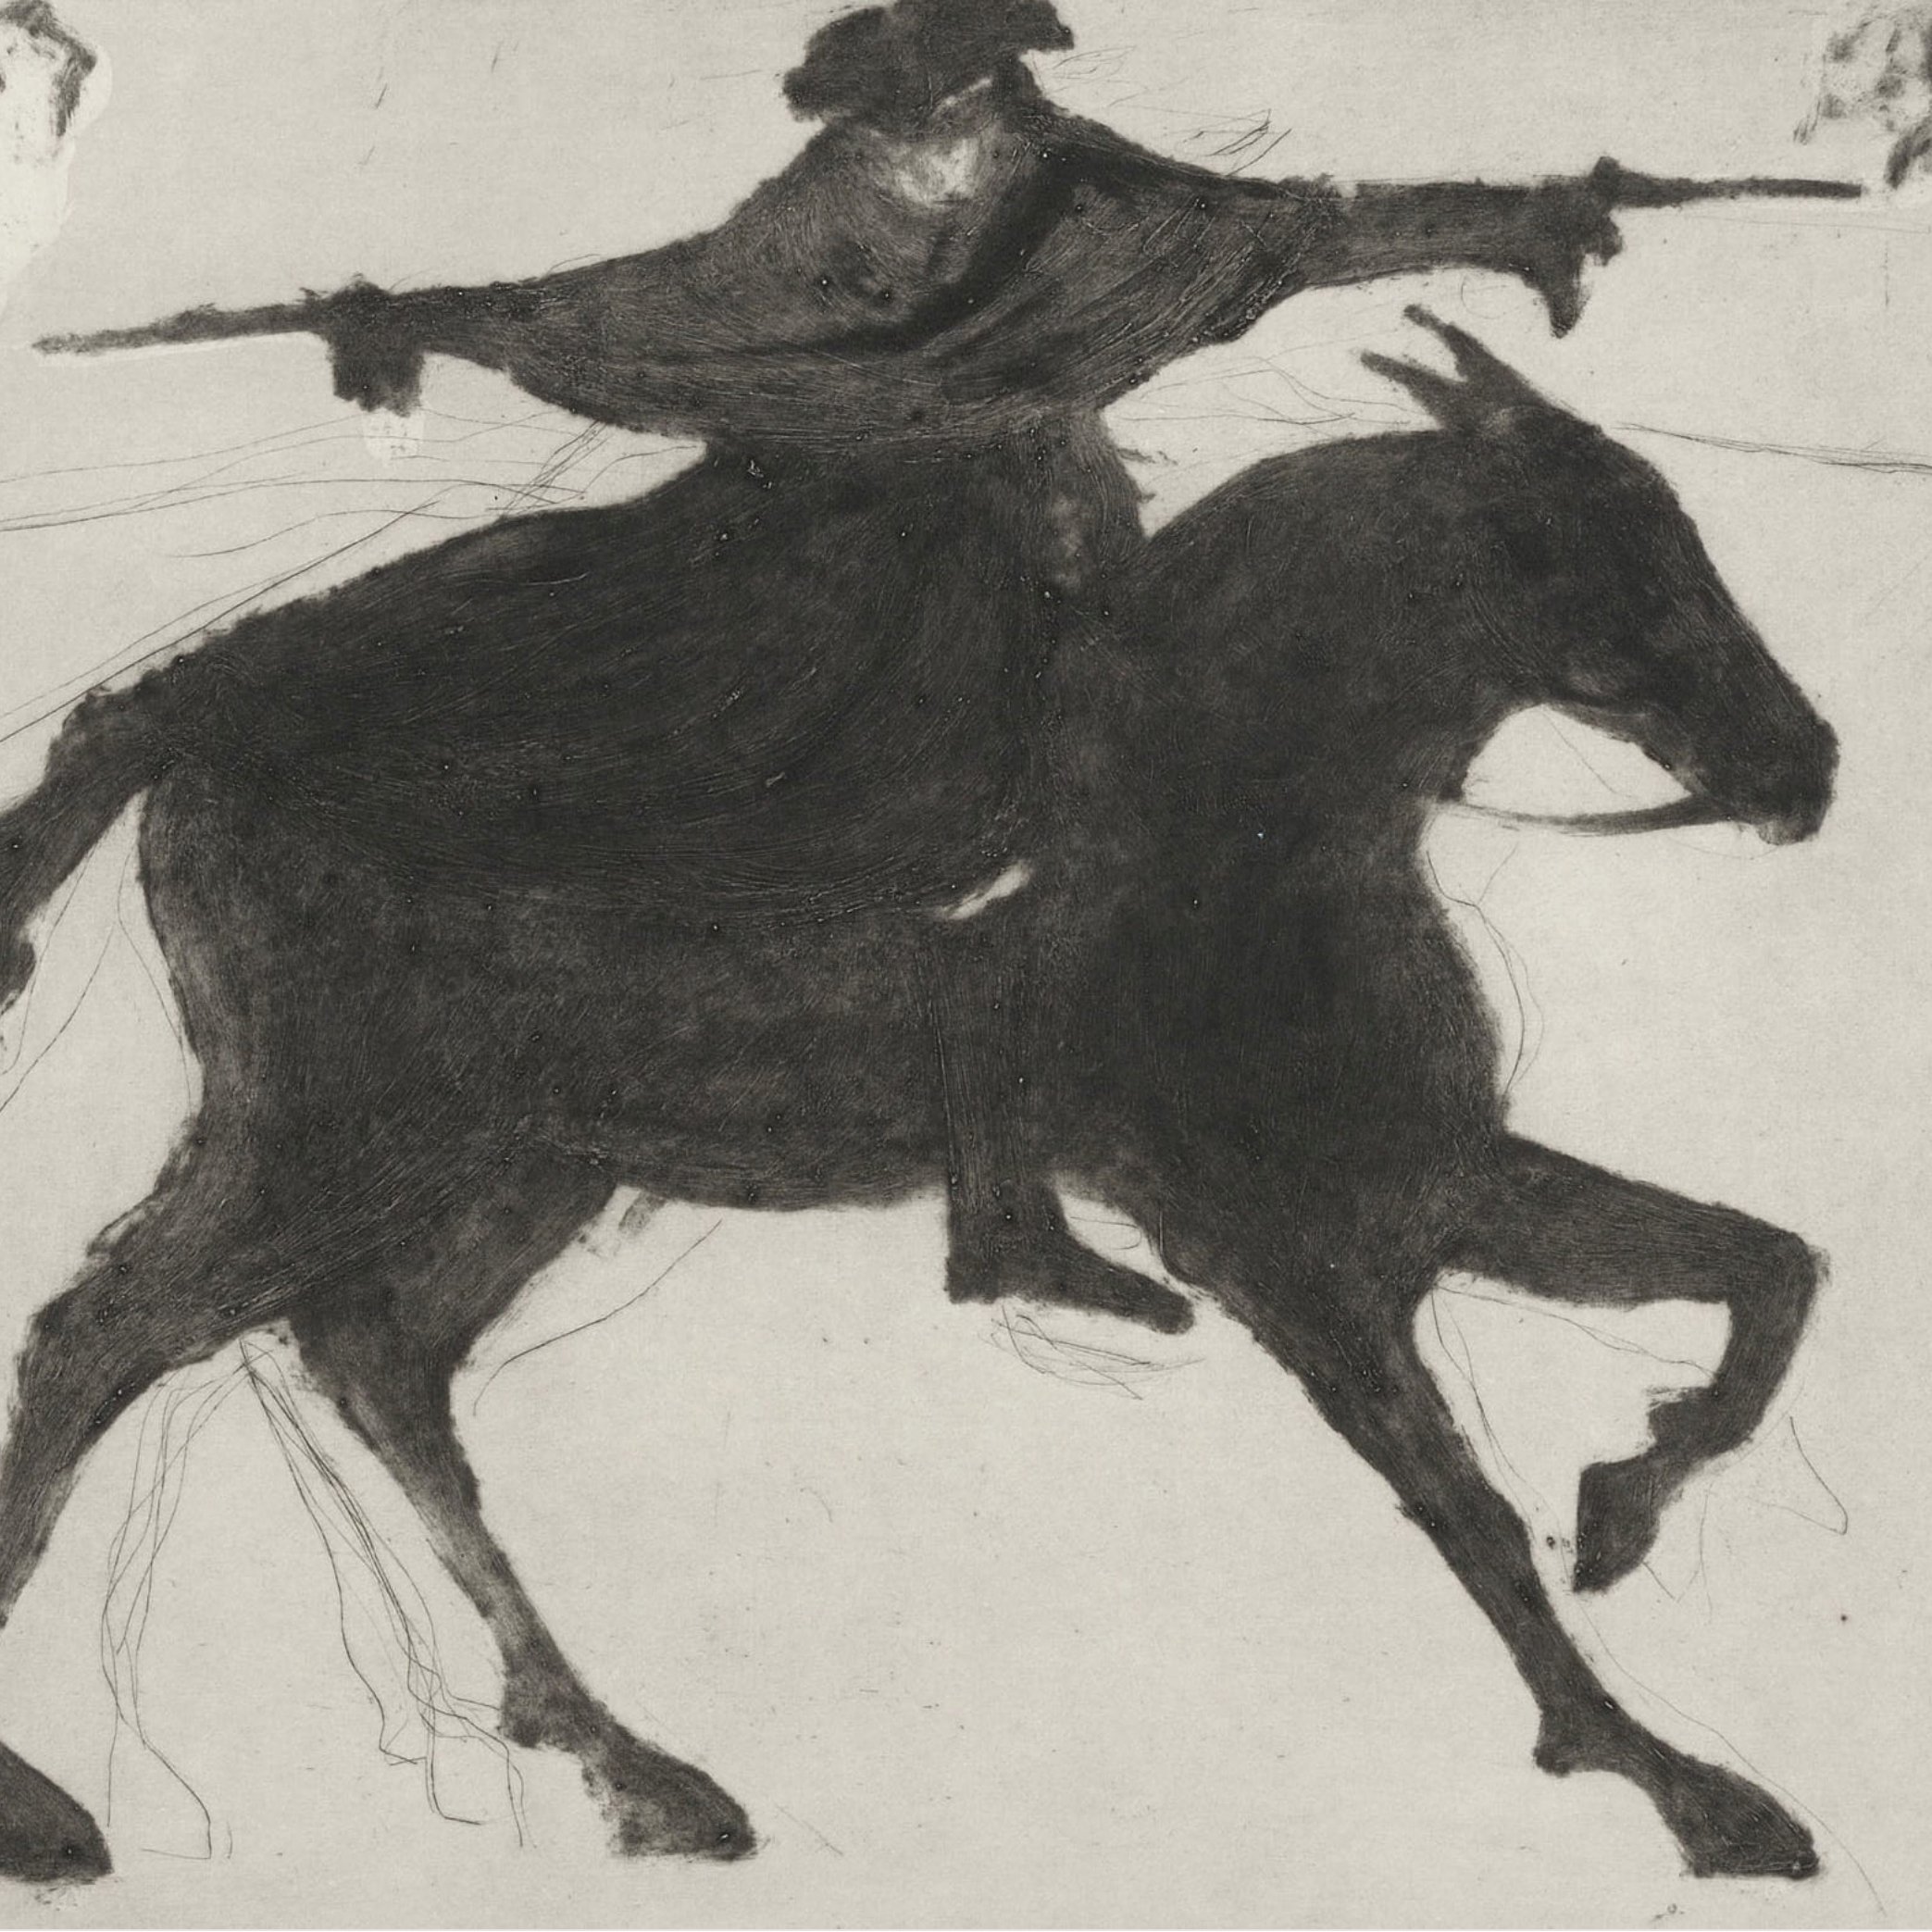 DICK TURPIN ON HIS WAY TO YORK BY KATE BOXER £880